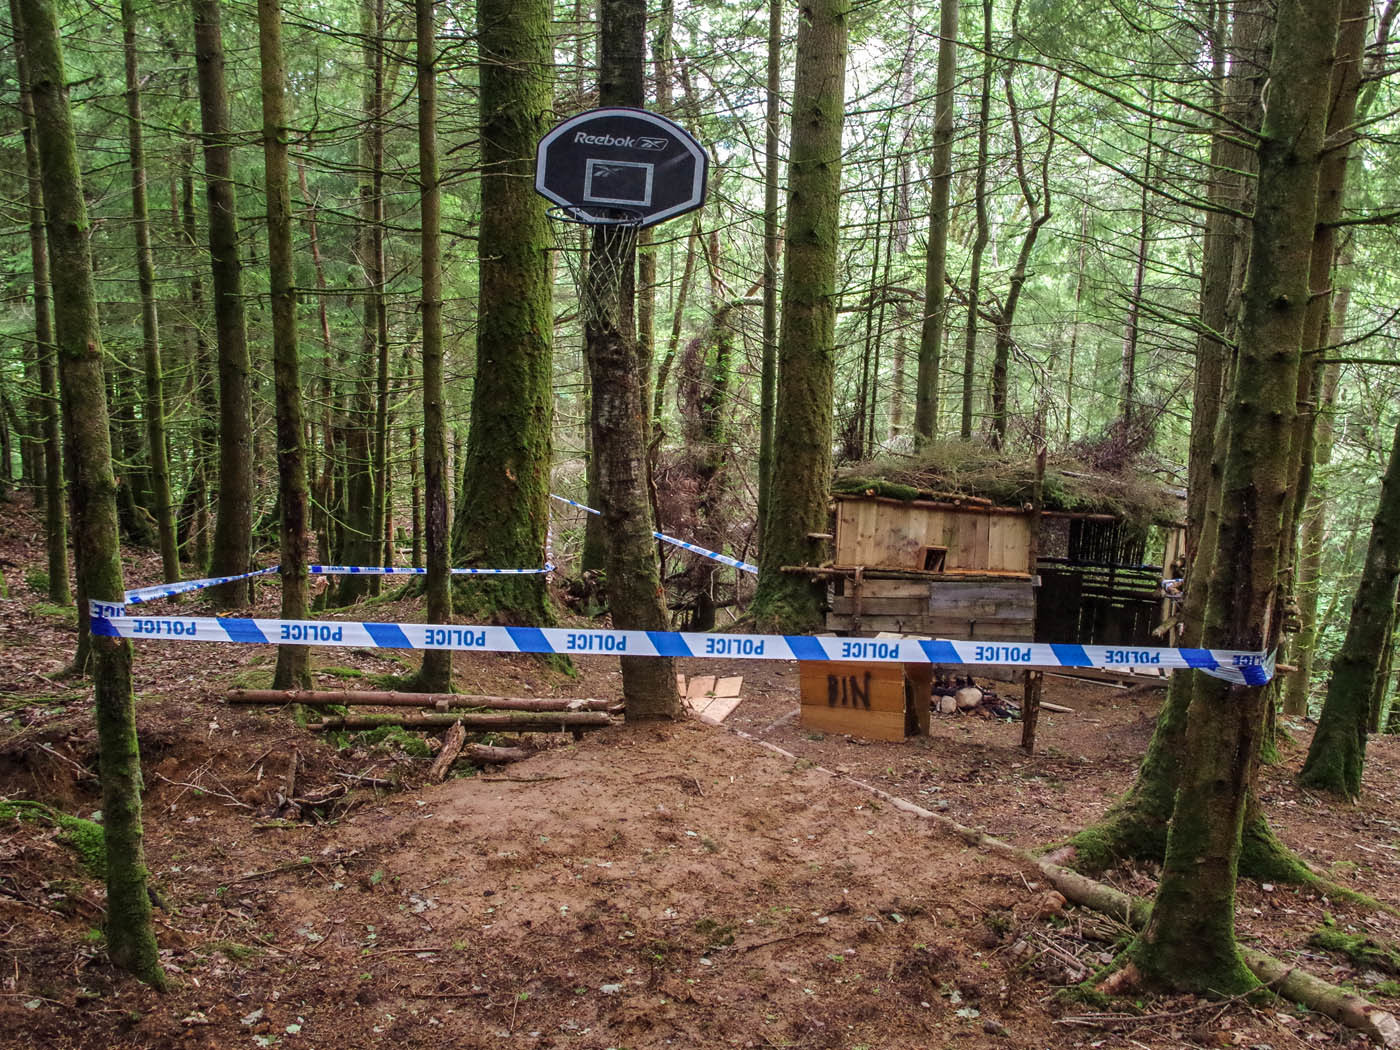 A local farmer was shocked to find a hut and mountain bike track created within Cowden Woods, Comrie.
Police are now investigating but some locals want to see it saved.